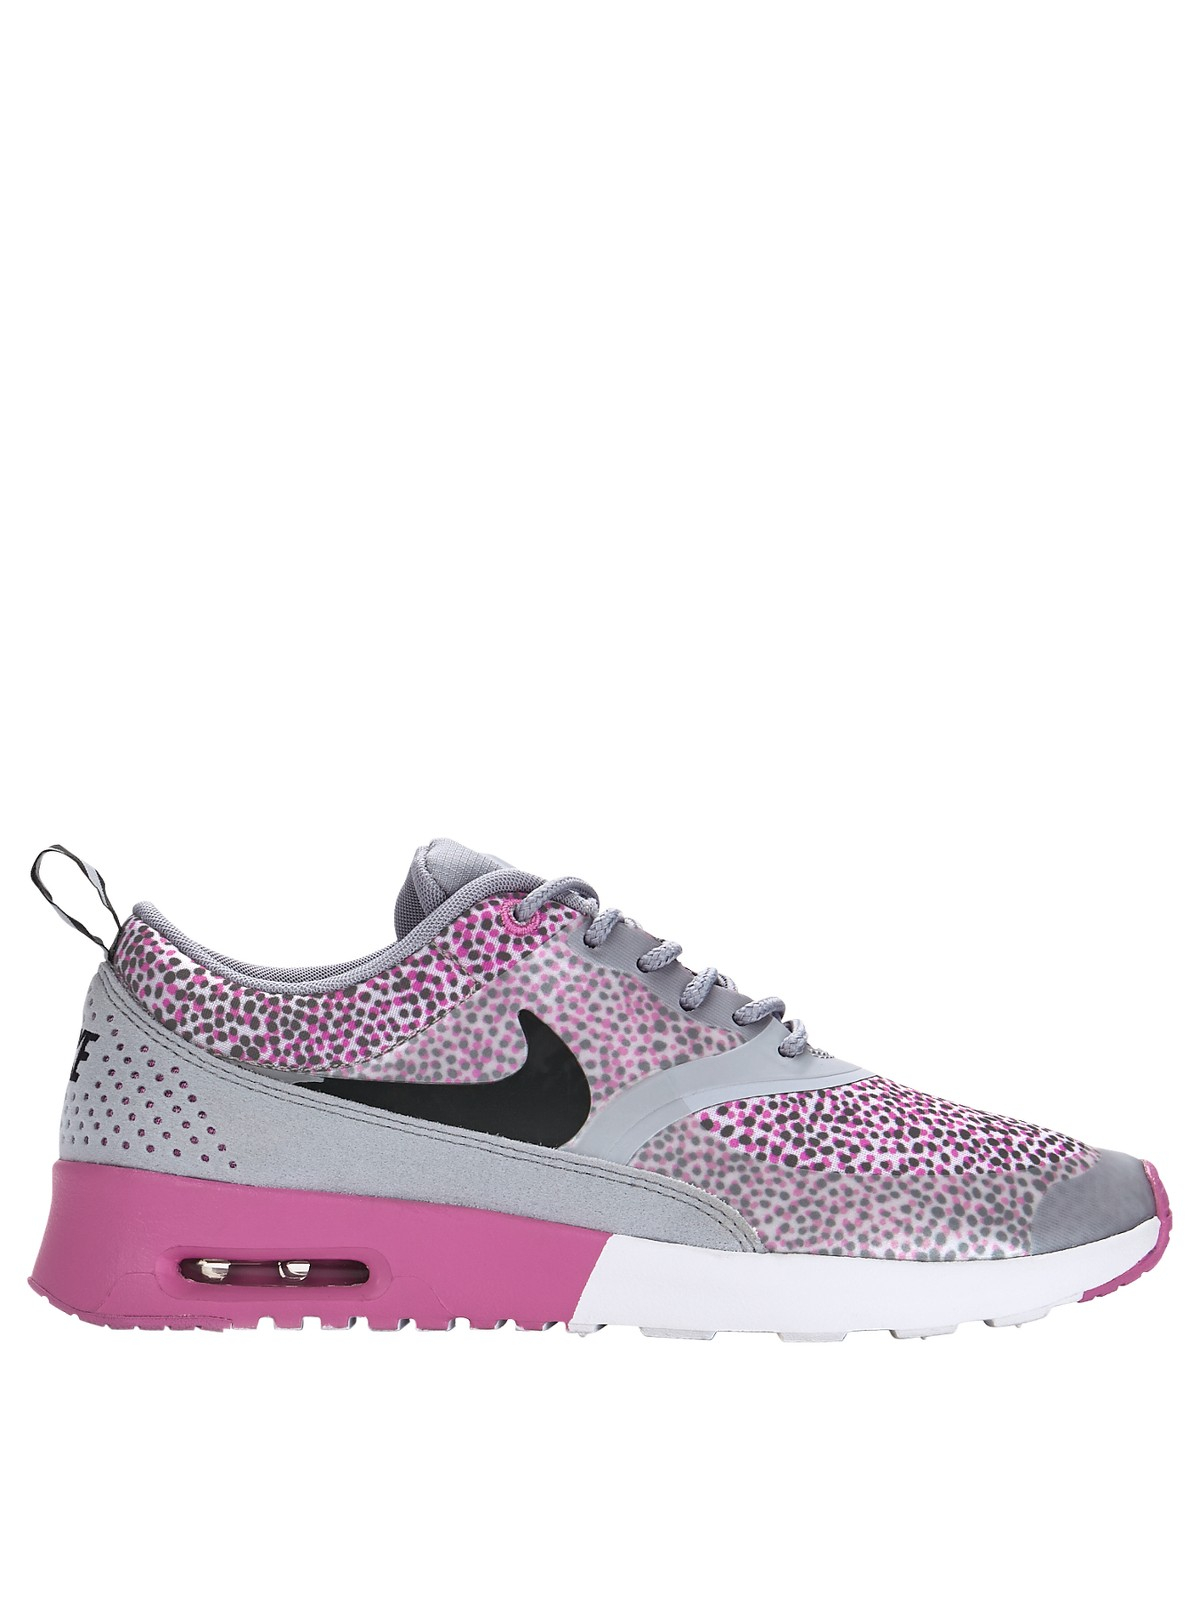 Nike Air Max Thea Print Trainers in Gray (grey/pink) | Lyst